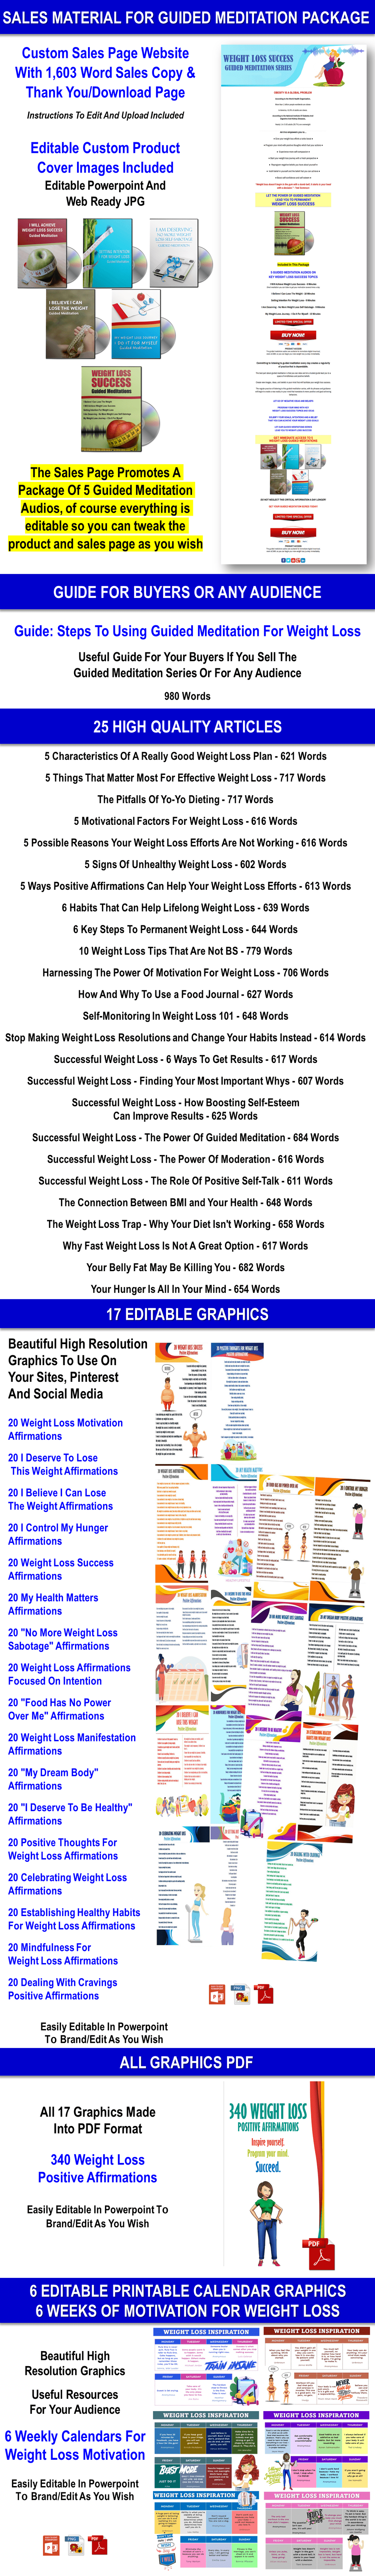 Weight Loss Success - 340 Positive Affirmations And Guided Meditations Giant Content Pack PLR Rights